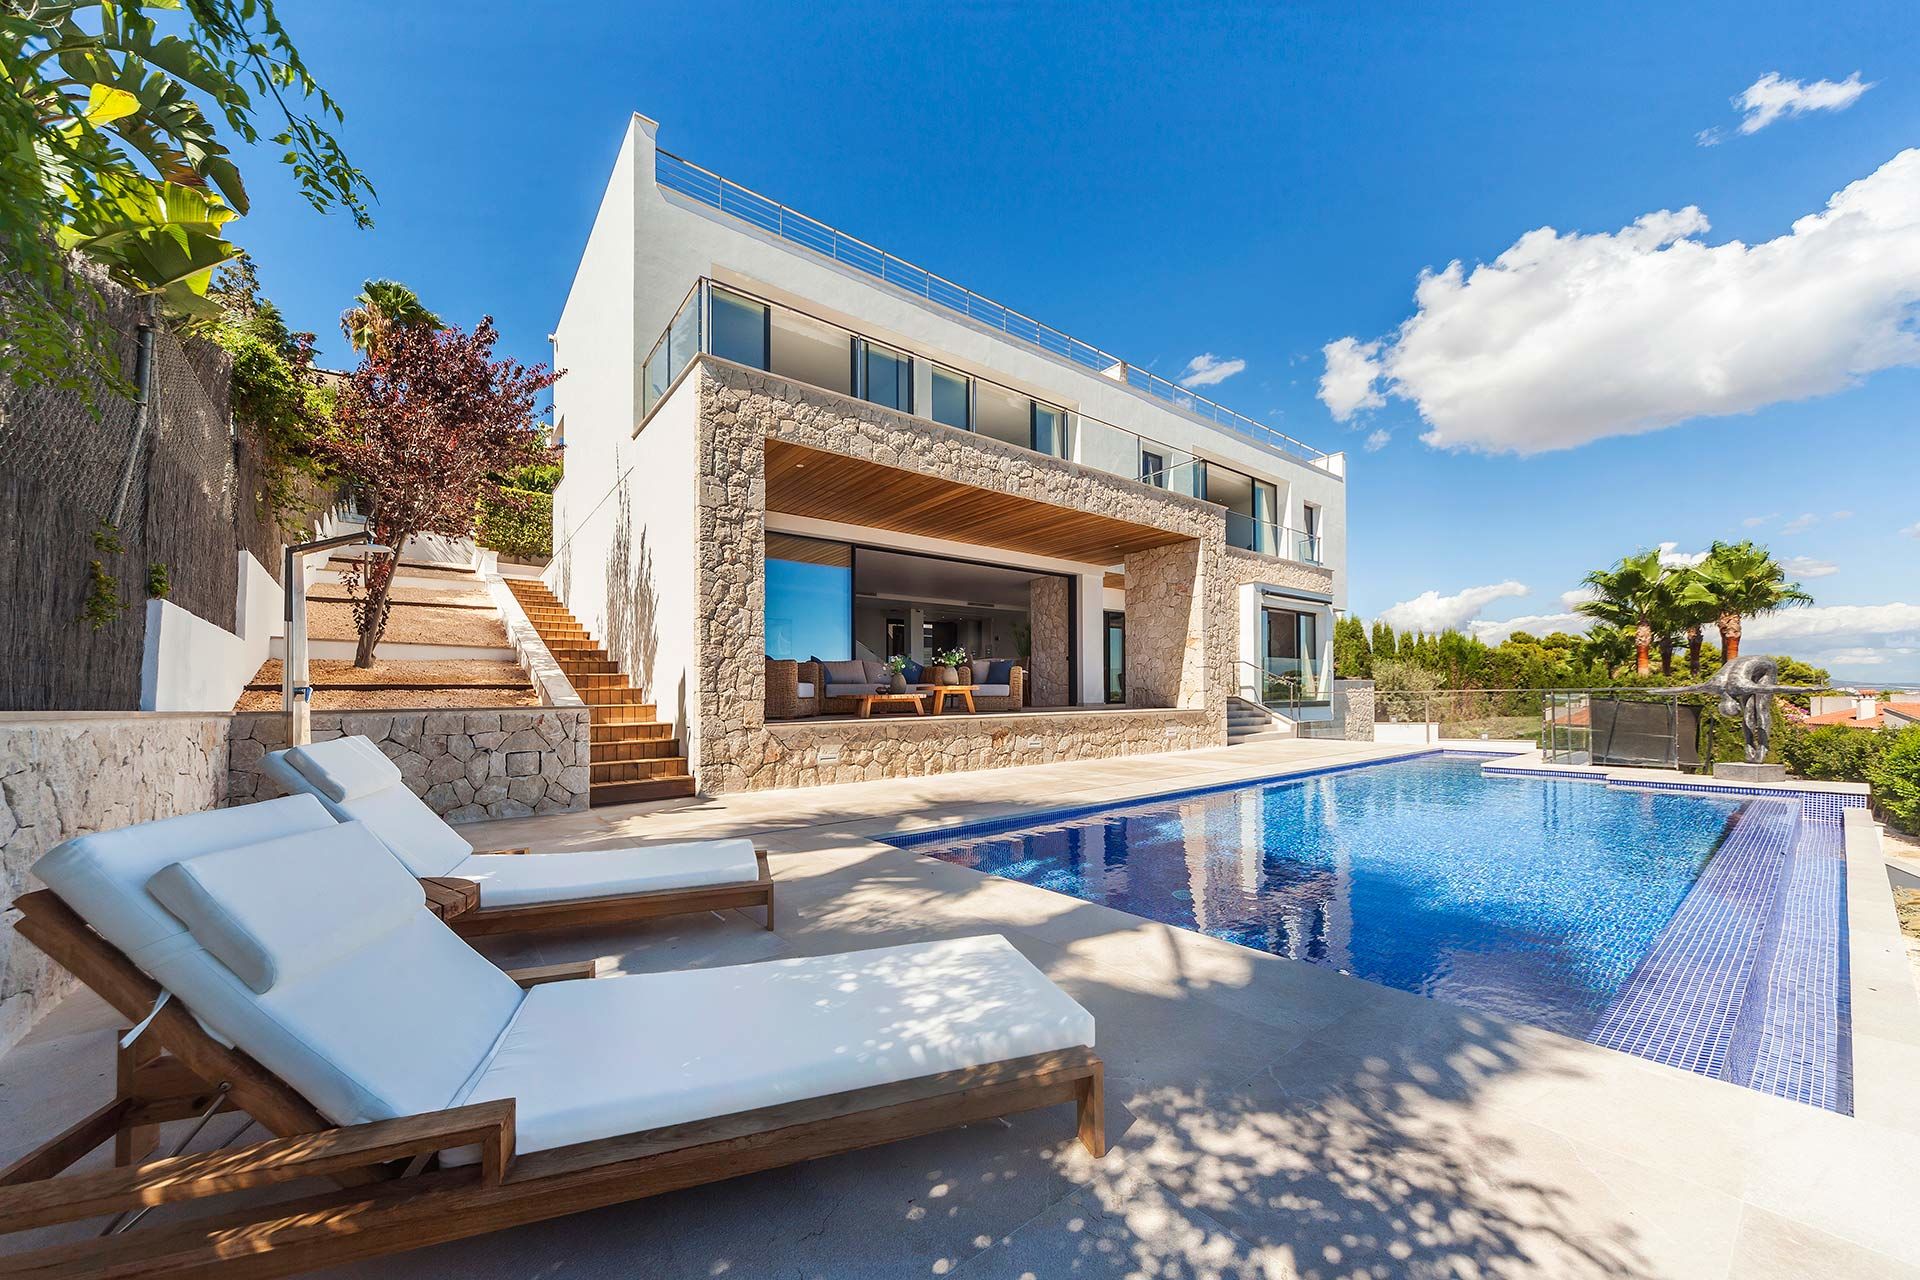 Completely renovated luxury villa with sea views in an exclusive residential area in Bendinat